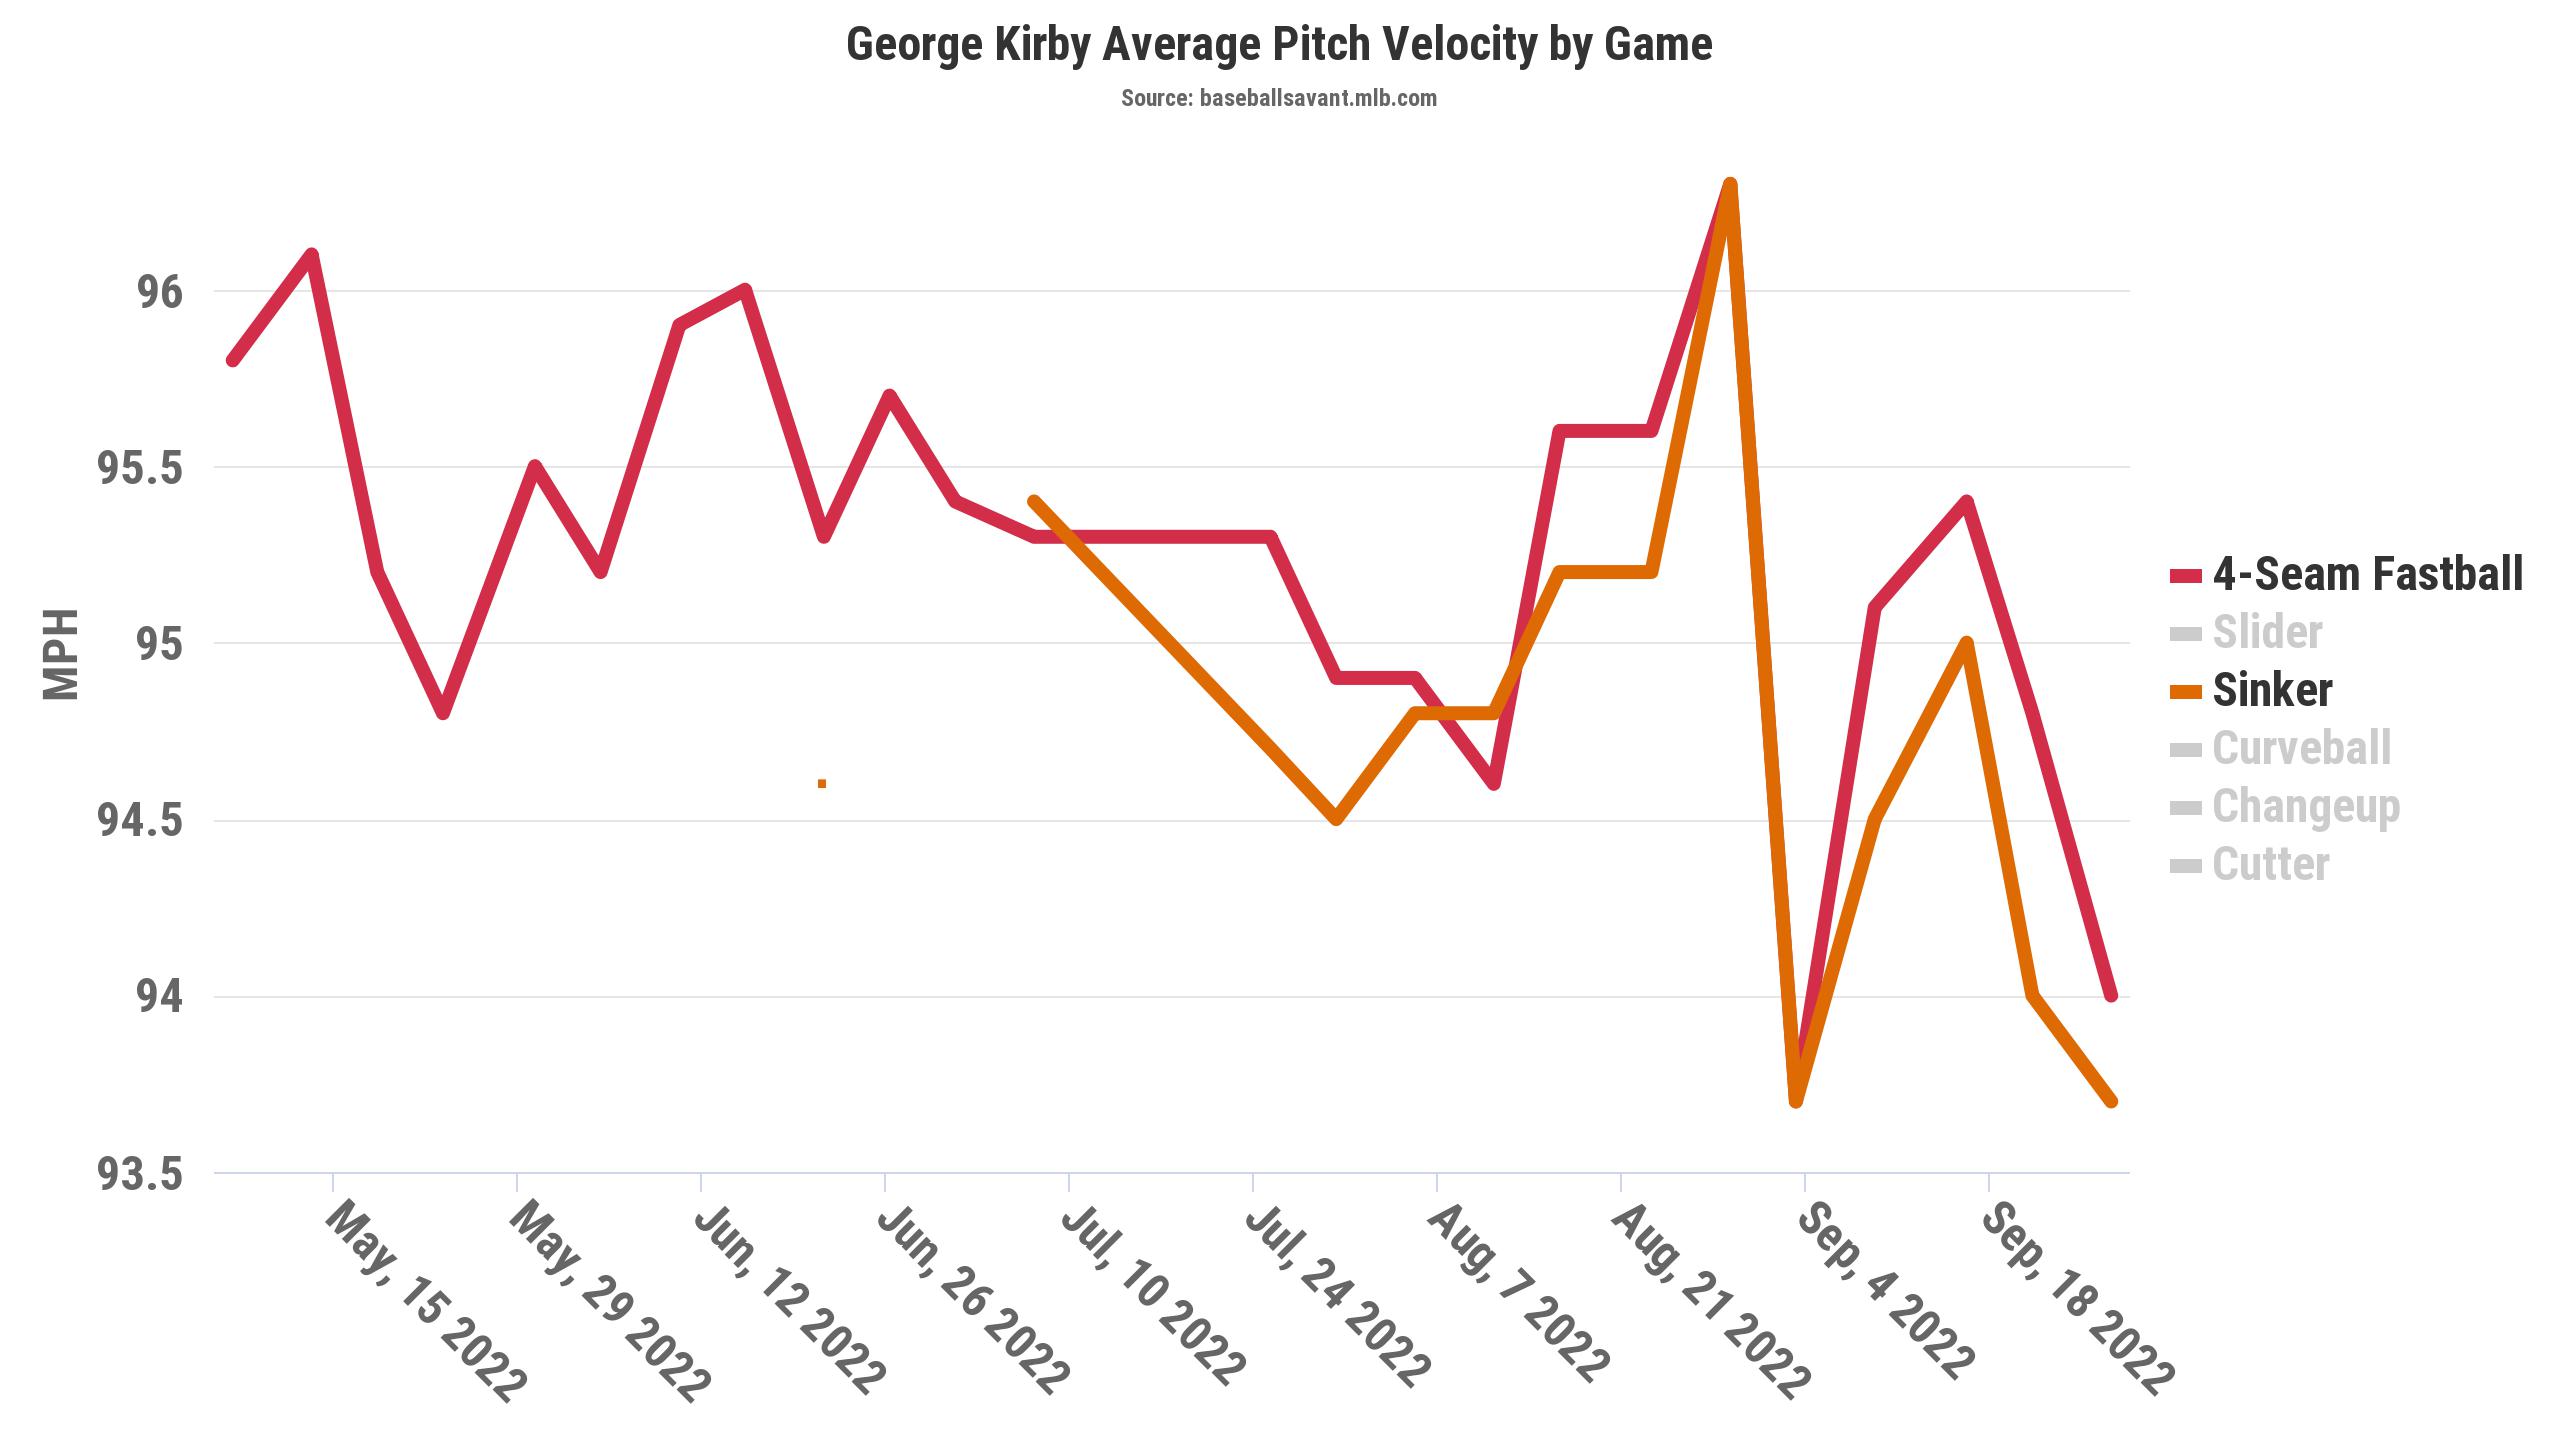 As Statcast shows, Kirby's fastball velocity entering Monday was down from his season average -- continuing a late-season trend. (The big dip on Sept. 4 was his rain-shortened start in Cleveland.)